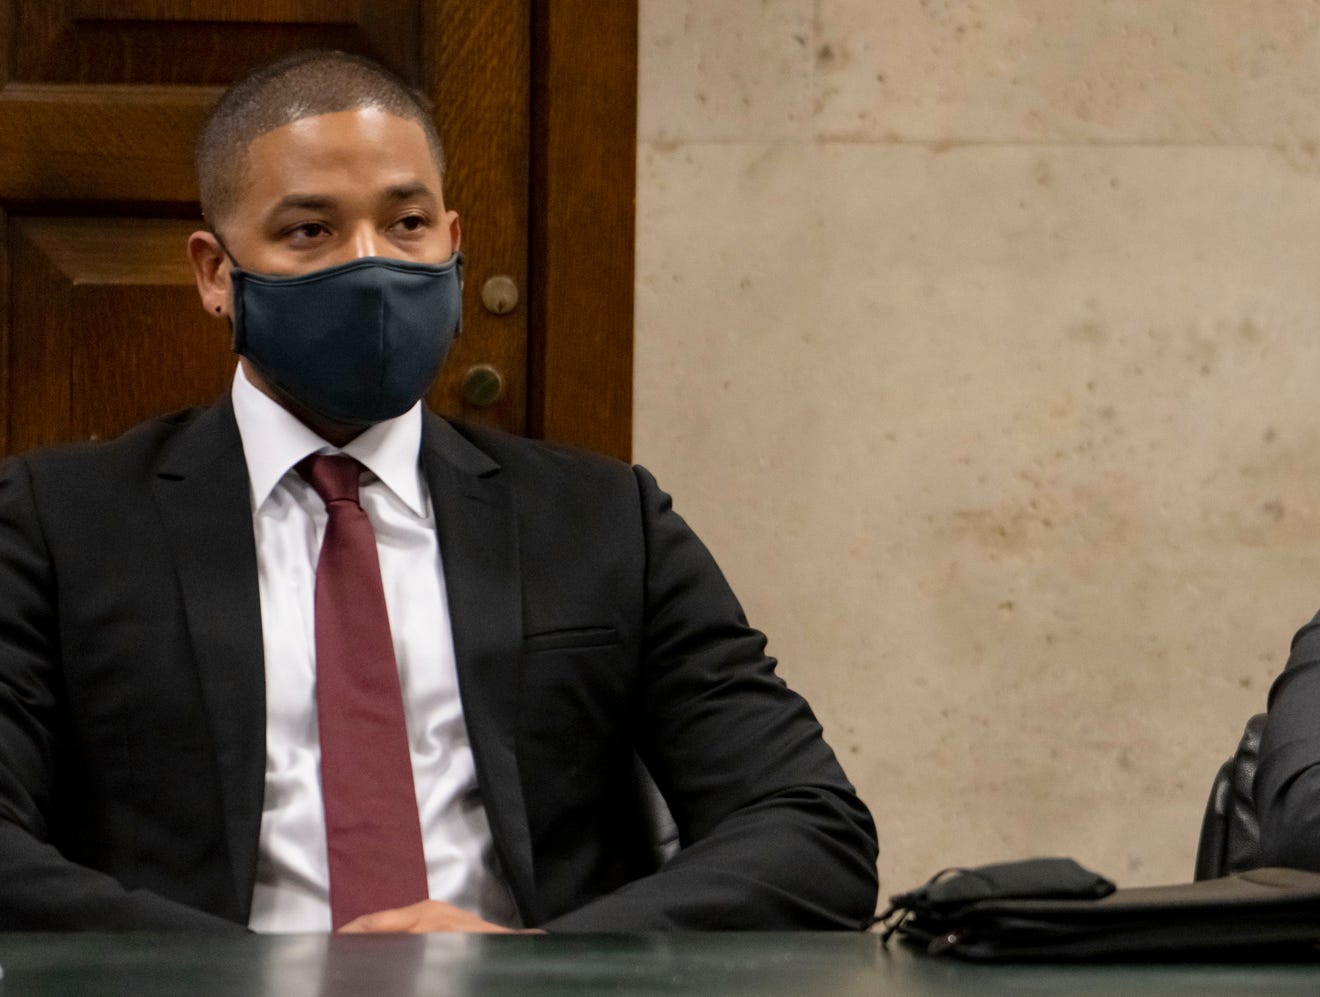 Actor Jussie Smollett appears at his sentencing hearing at the Leighton Criminal Court Building, Thursday, March 10, 2022, in Chicago. (Brian Cassella/Chicago Tribune via AP, Pool)